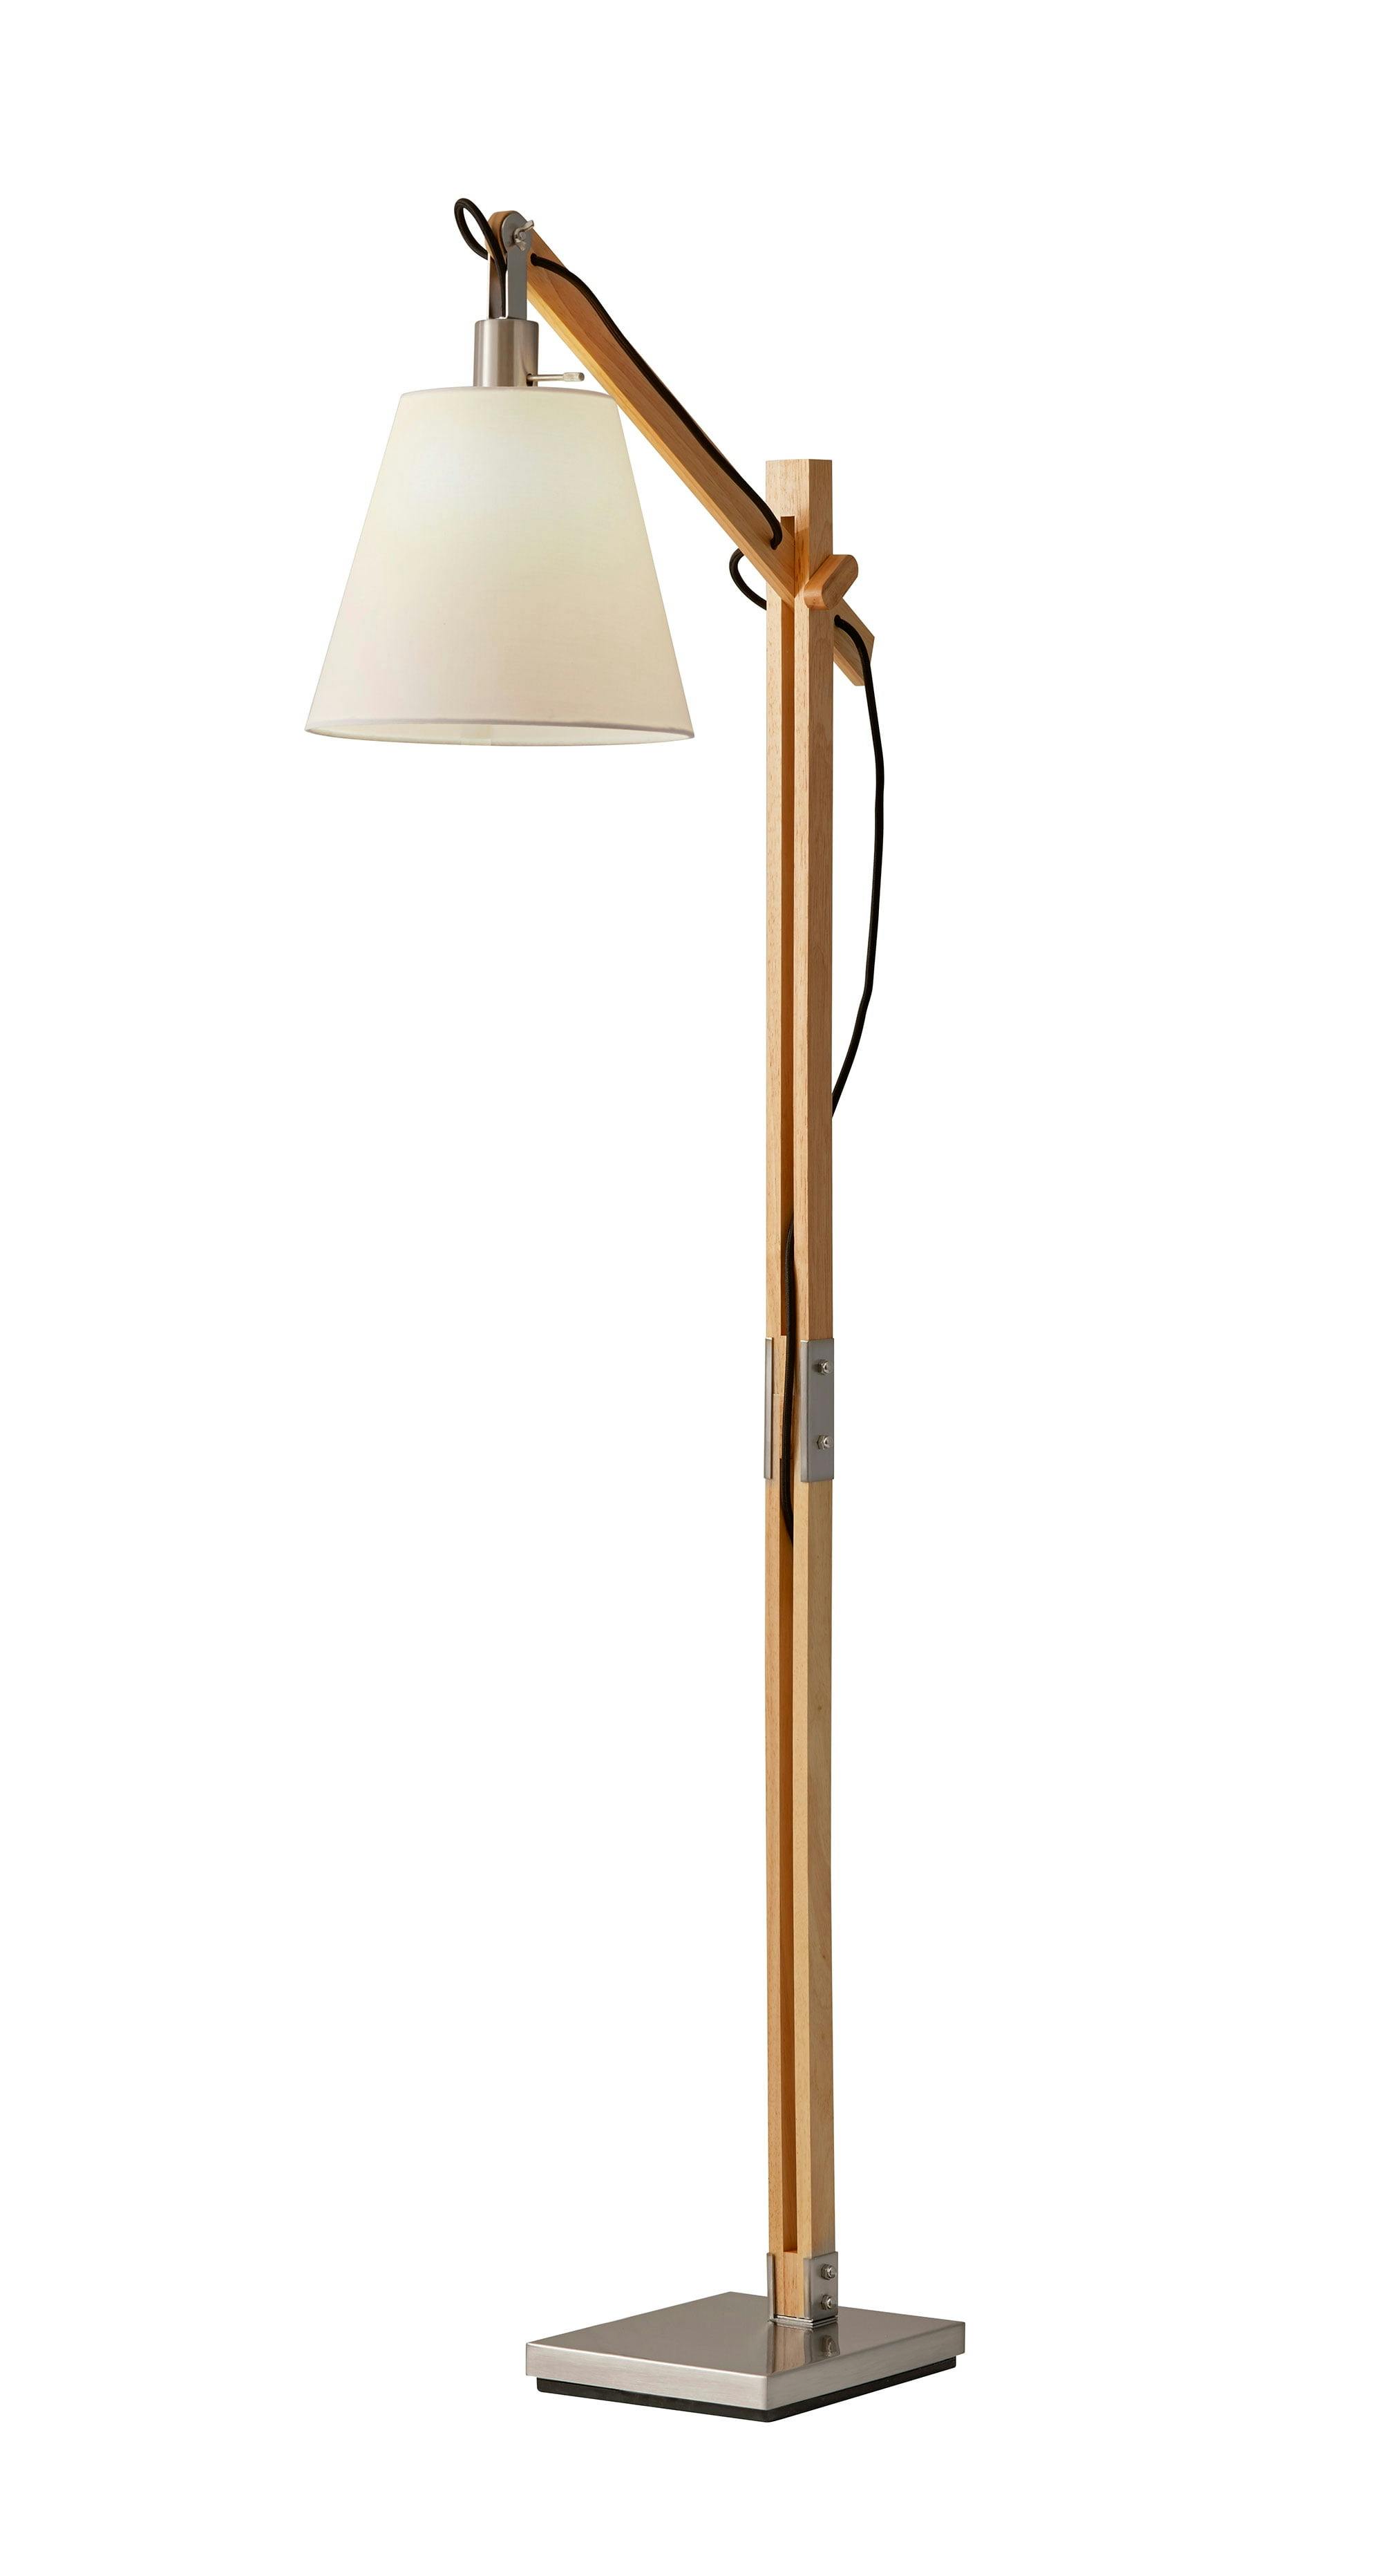 Walden Adjustable Arc Floor Lamp with Off-White Shade and Satin Steel Base